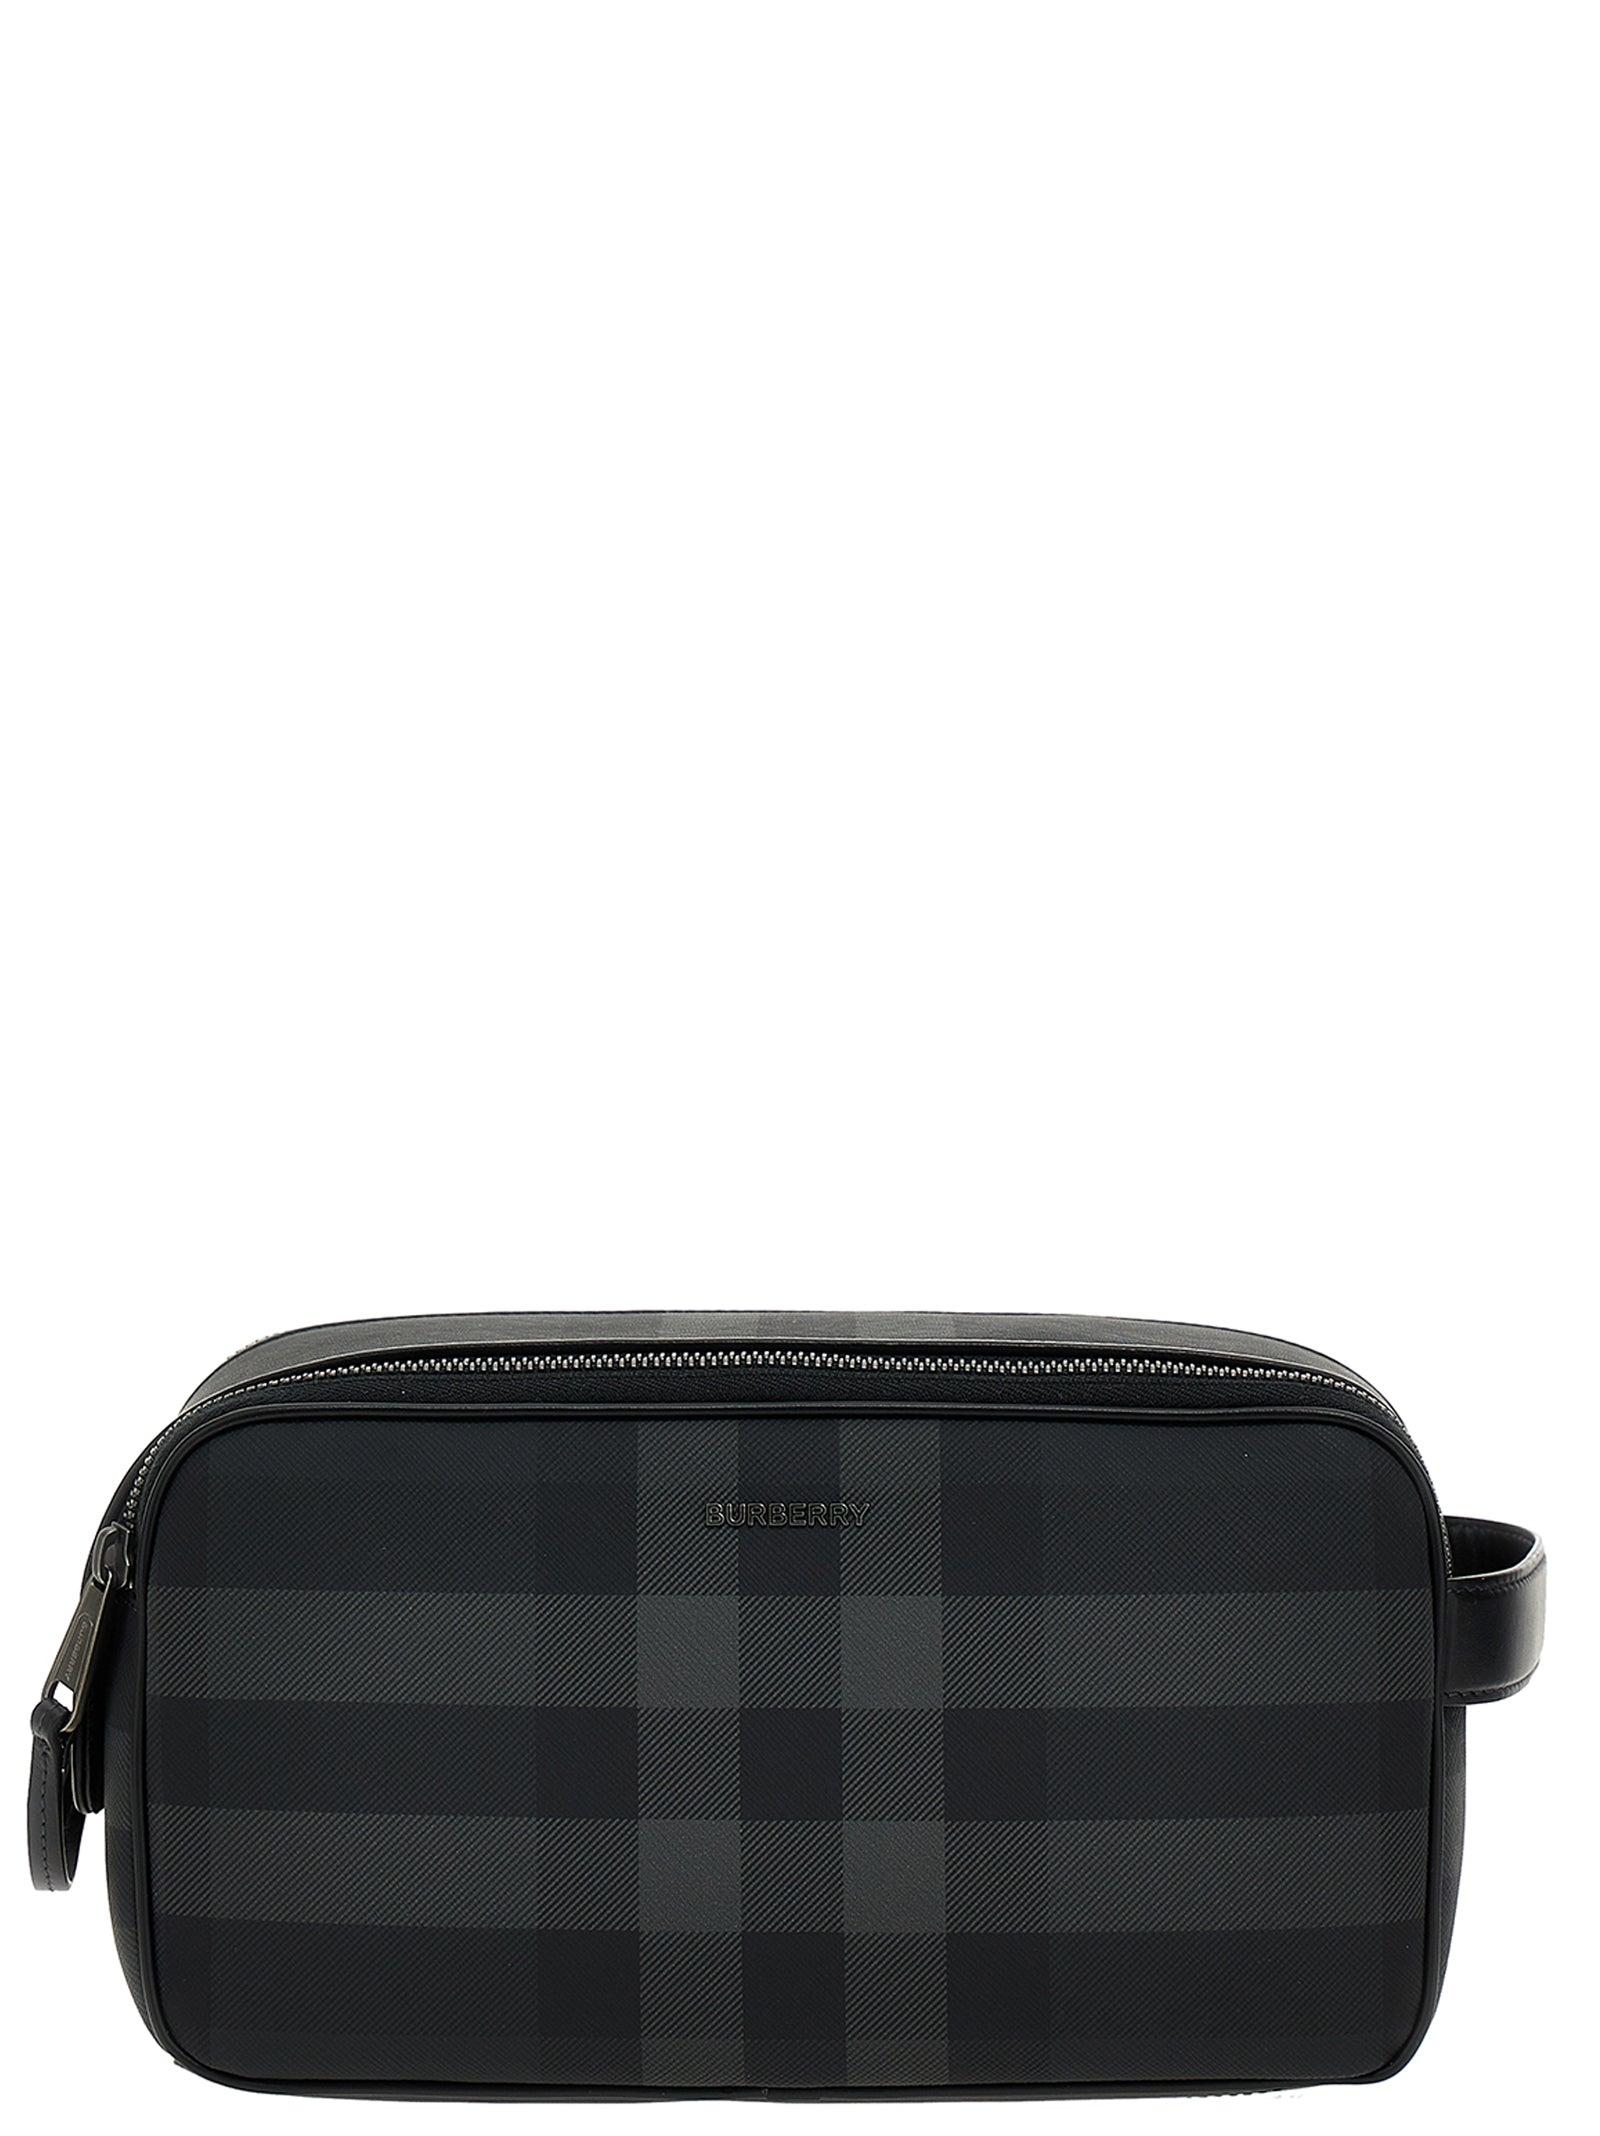 Burberry Check Make-up Bag Beauty Gray in Men | Lyst